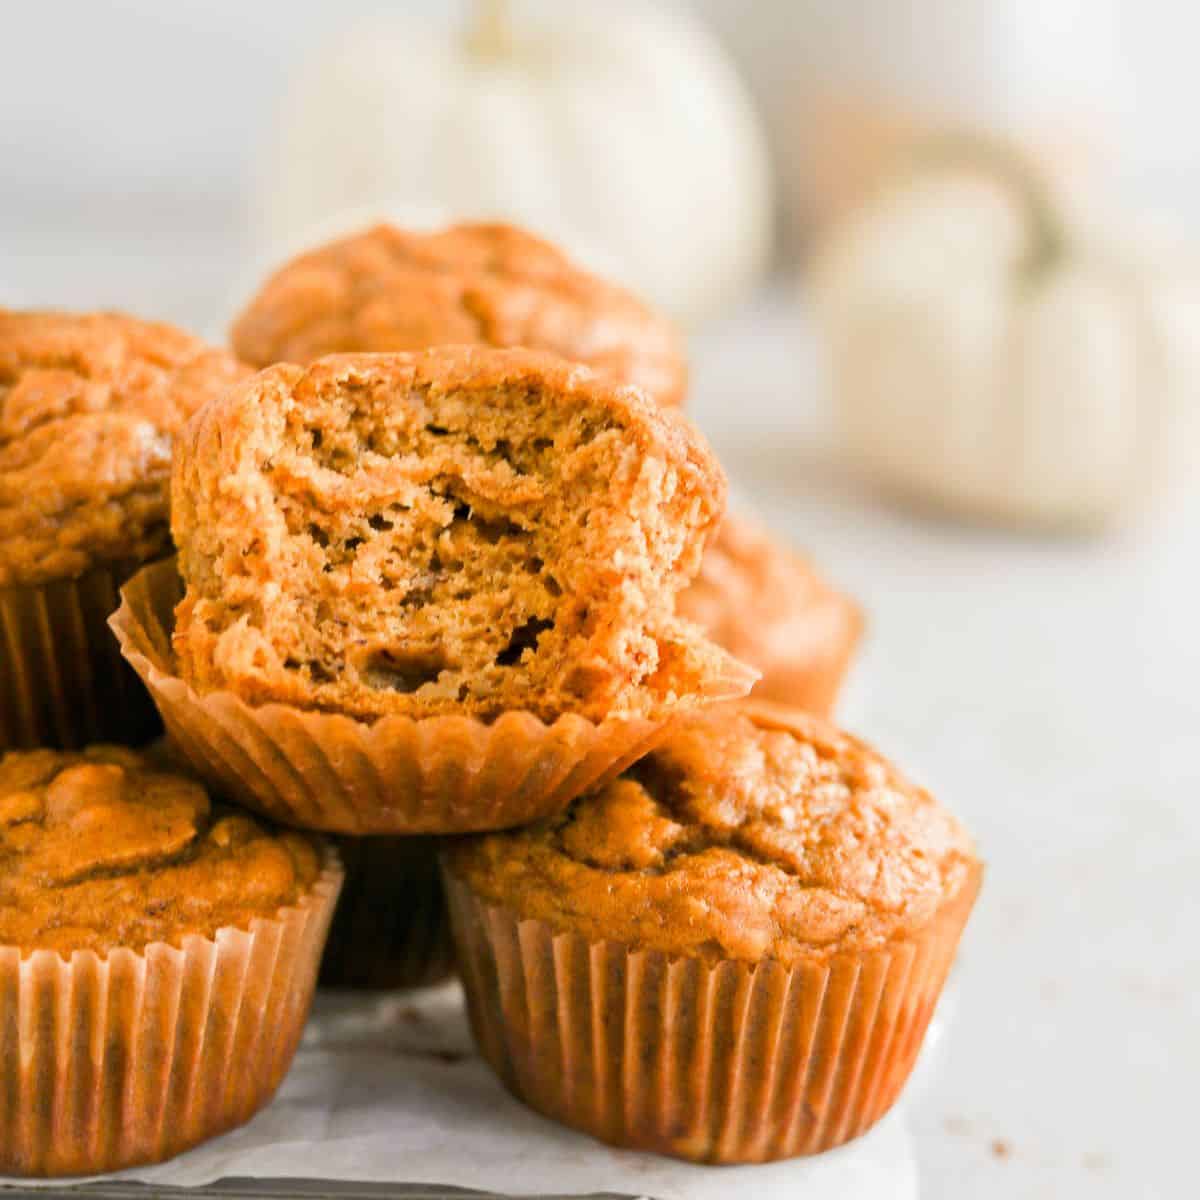 pumpkin banana muffins piled on each other with a bite in the center one.